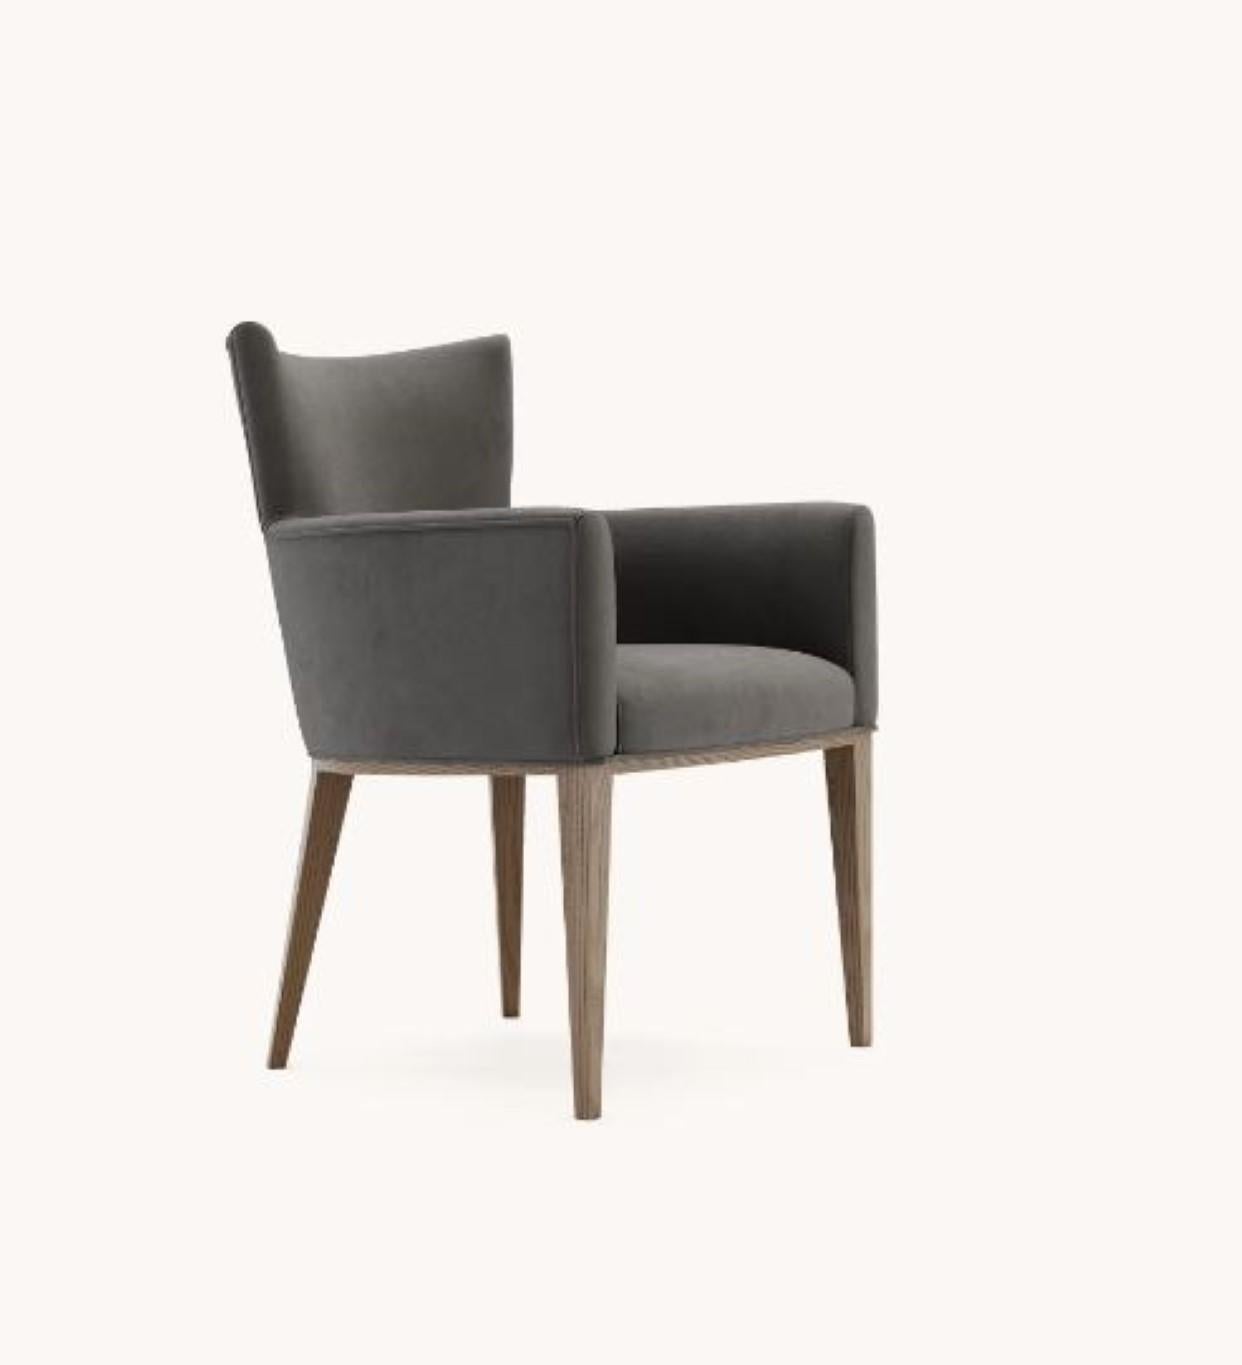 Vianna Chair by Domkapa
Materials: Walnut Stained Ash, Velvet.
Dimensions: W 62 x D 66 x H 85 cm. 
Also available in different materials. Please contact us.

The epitome of comfort, the best description of Vianna chair. Supported by four wooden